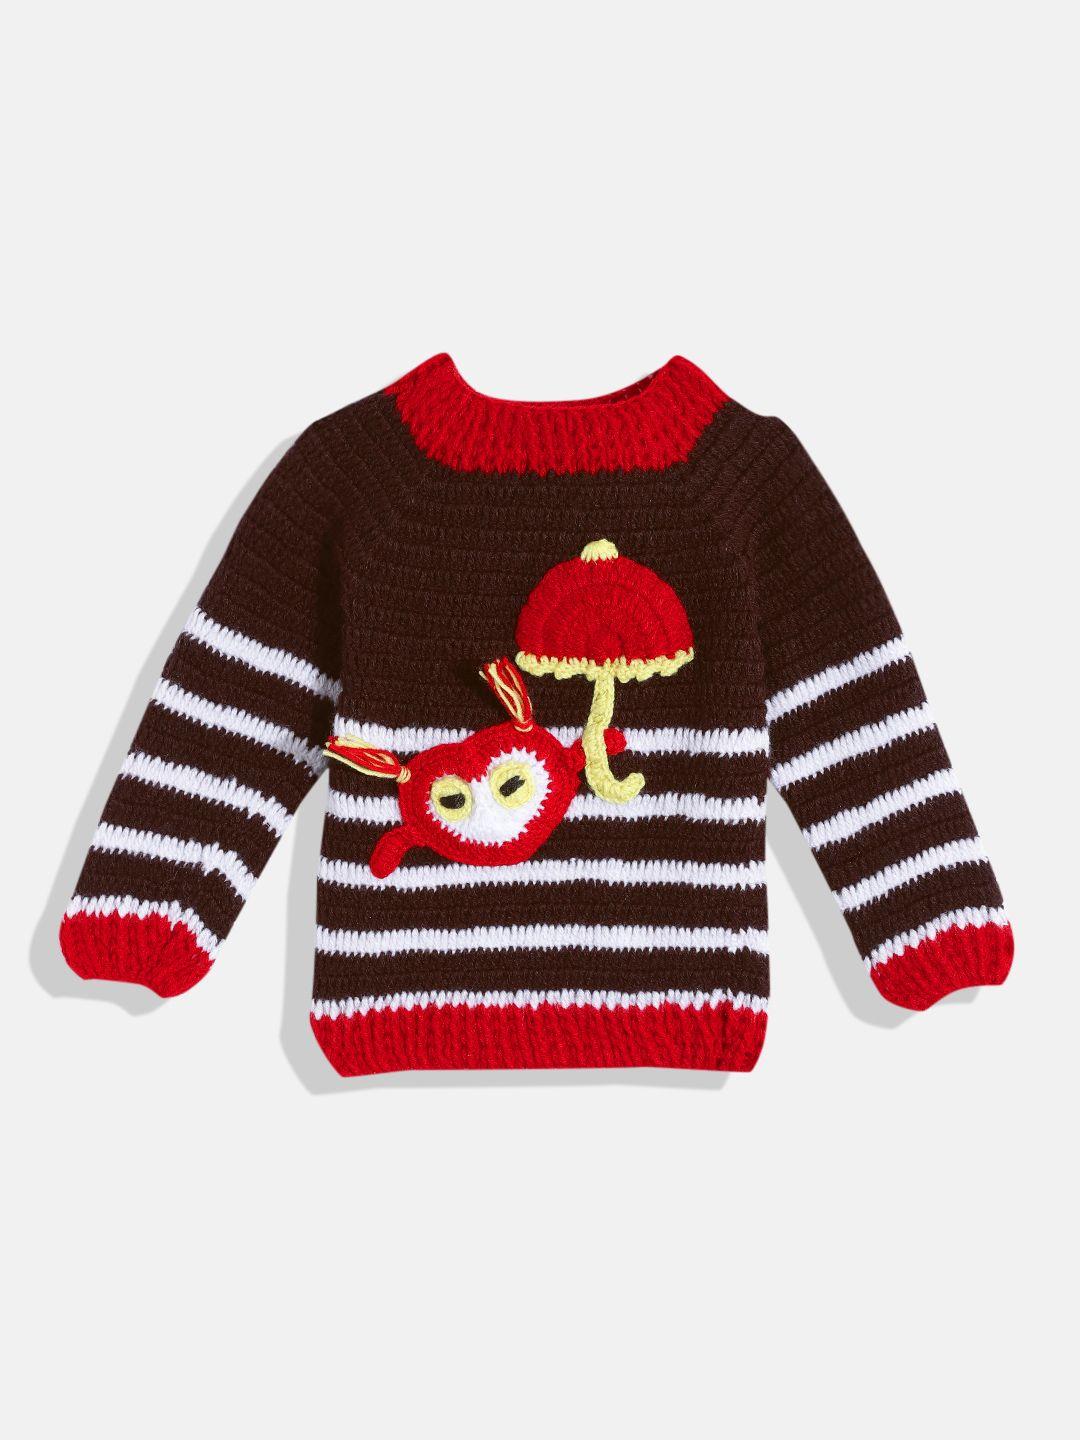 chutput unisex kids brown & red striped pullover with applique detail